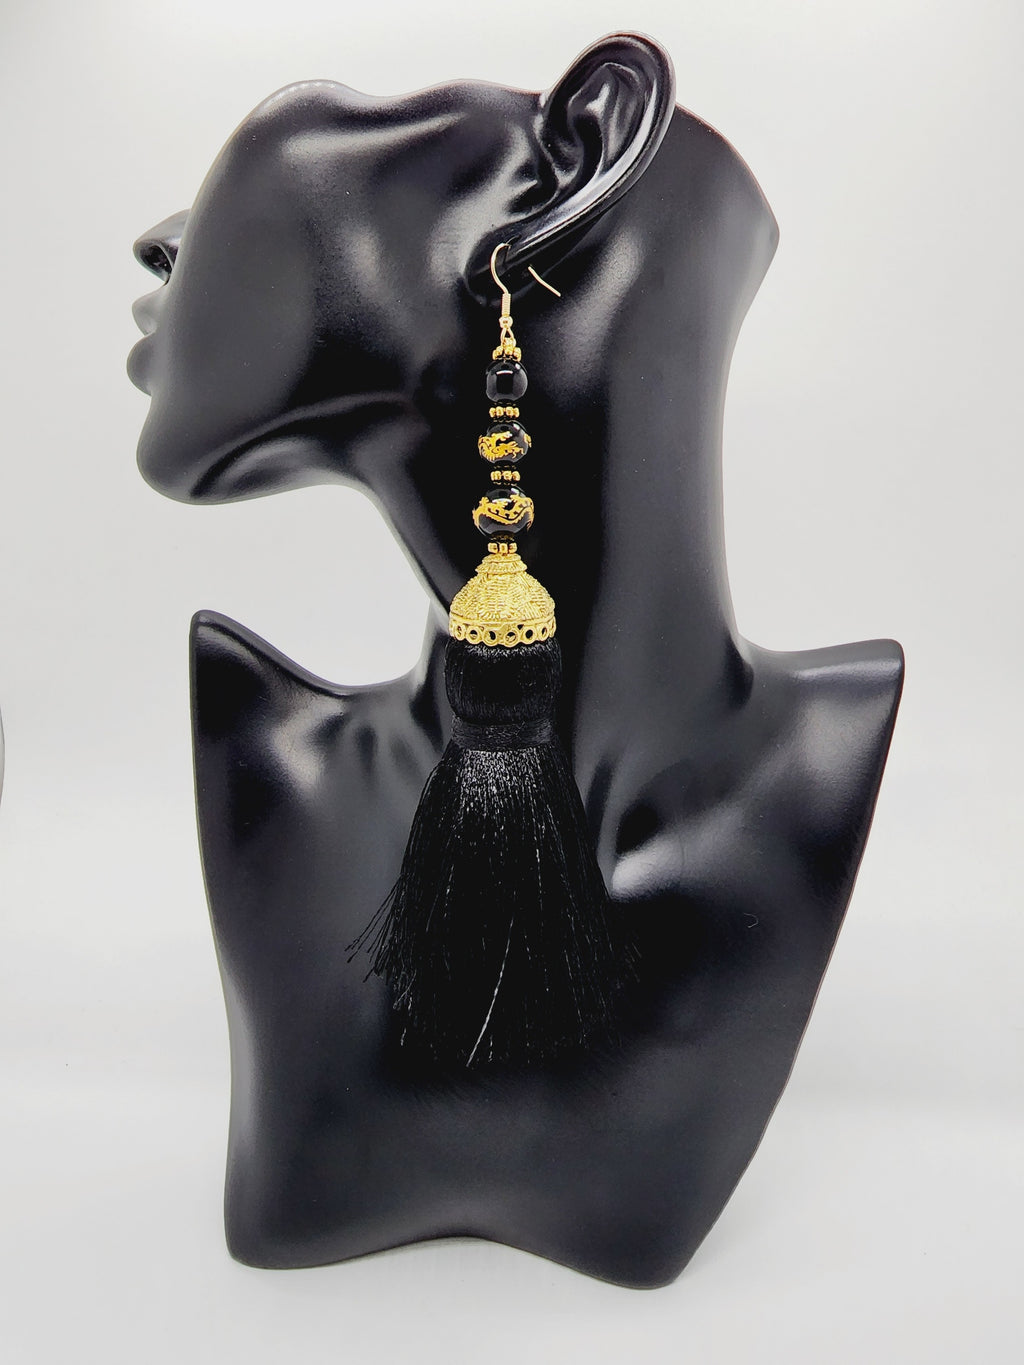 PLEASE BE AWARE: Earrings Hang Past Shoulders  5.5 inches or more  Length: 6 inches | Weight: 2.7 ounces (earlobe supports provided due to weight)  Distinctly You! These handmade earrings are made using gold and filigree beads, gold and black dragon beads, gold dome covers, black silk tassels. and hypoallergenic hooks with back closures. 